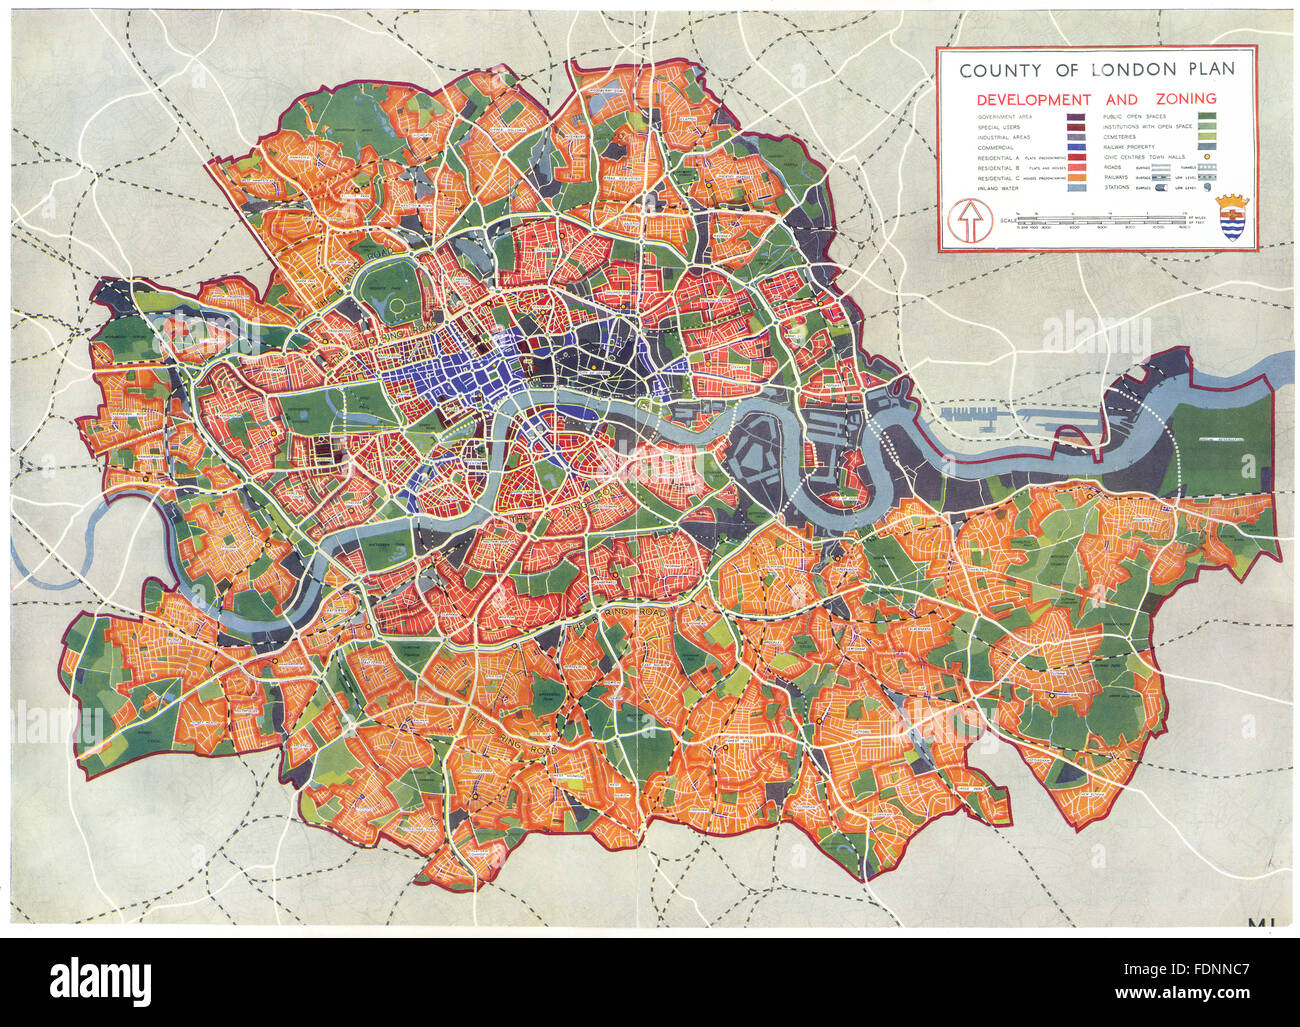 city of london zoning map Zoning Map High Resolution Stock Photography And Images Alamy city of london zoning map